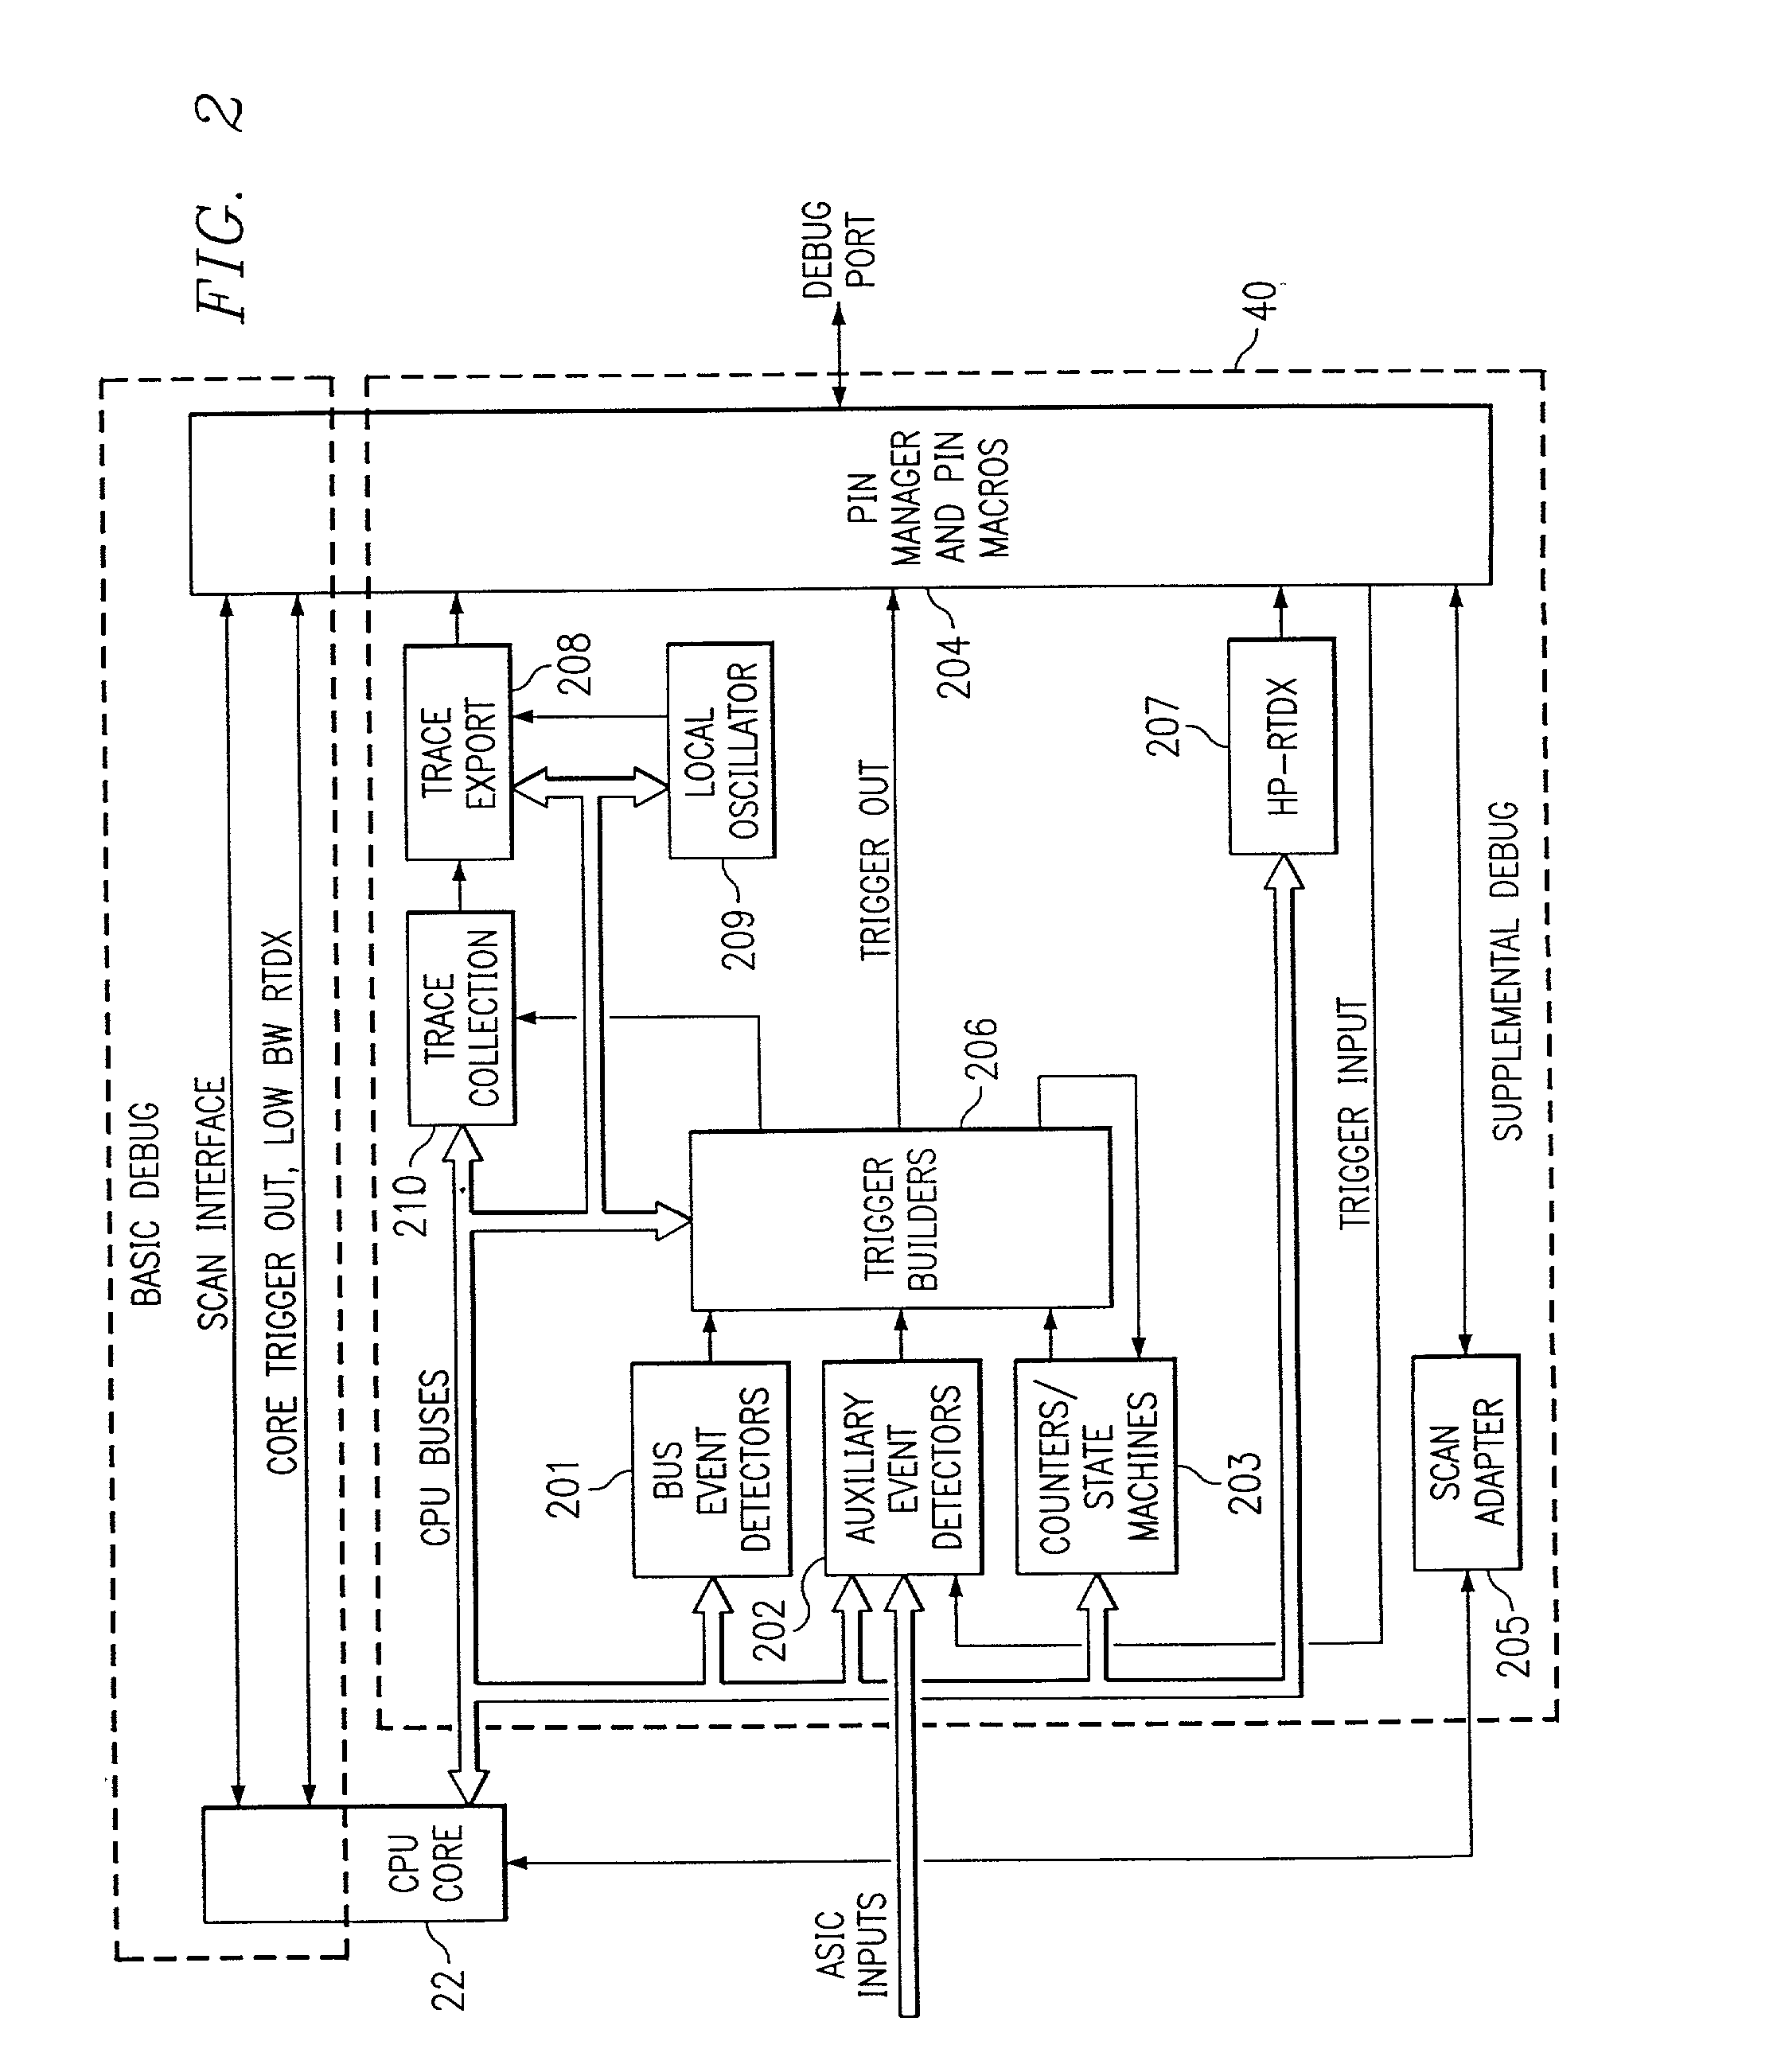 Method using embedded real-time analysis components with corresponding real-time operating system software objects